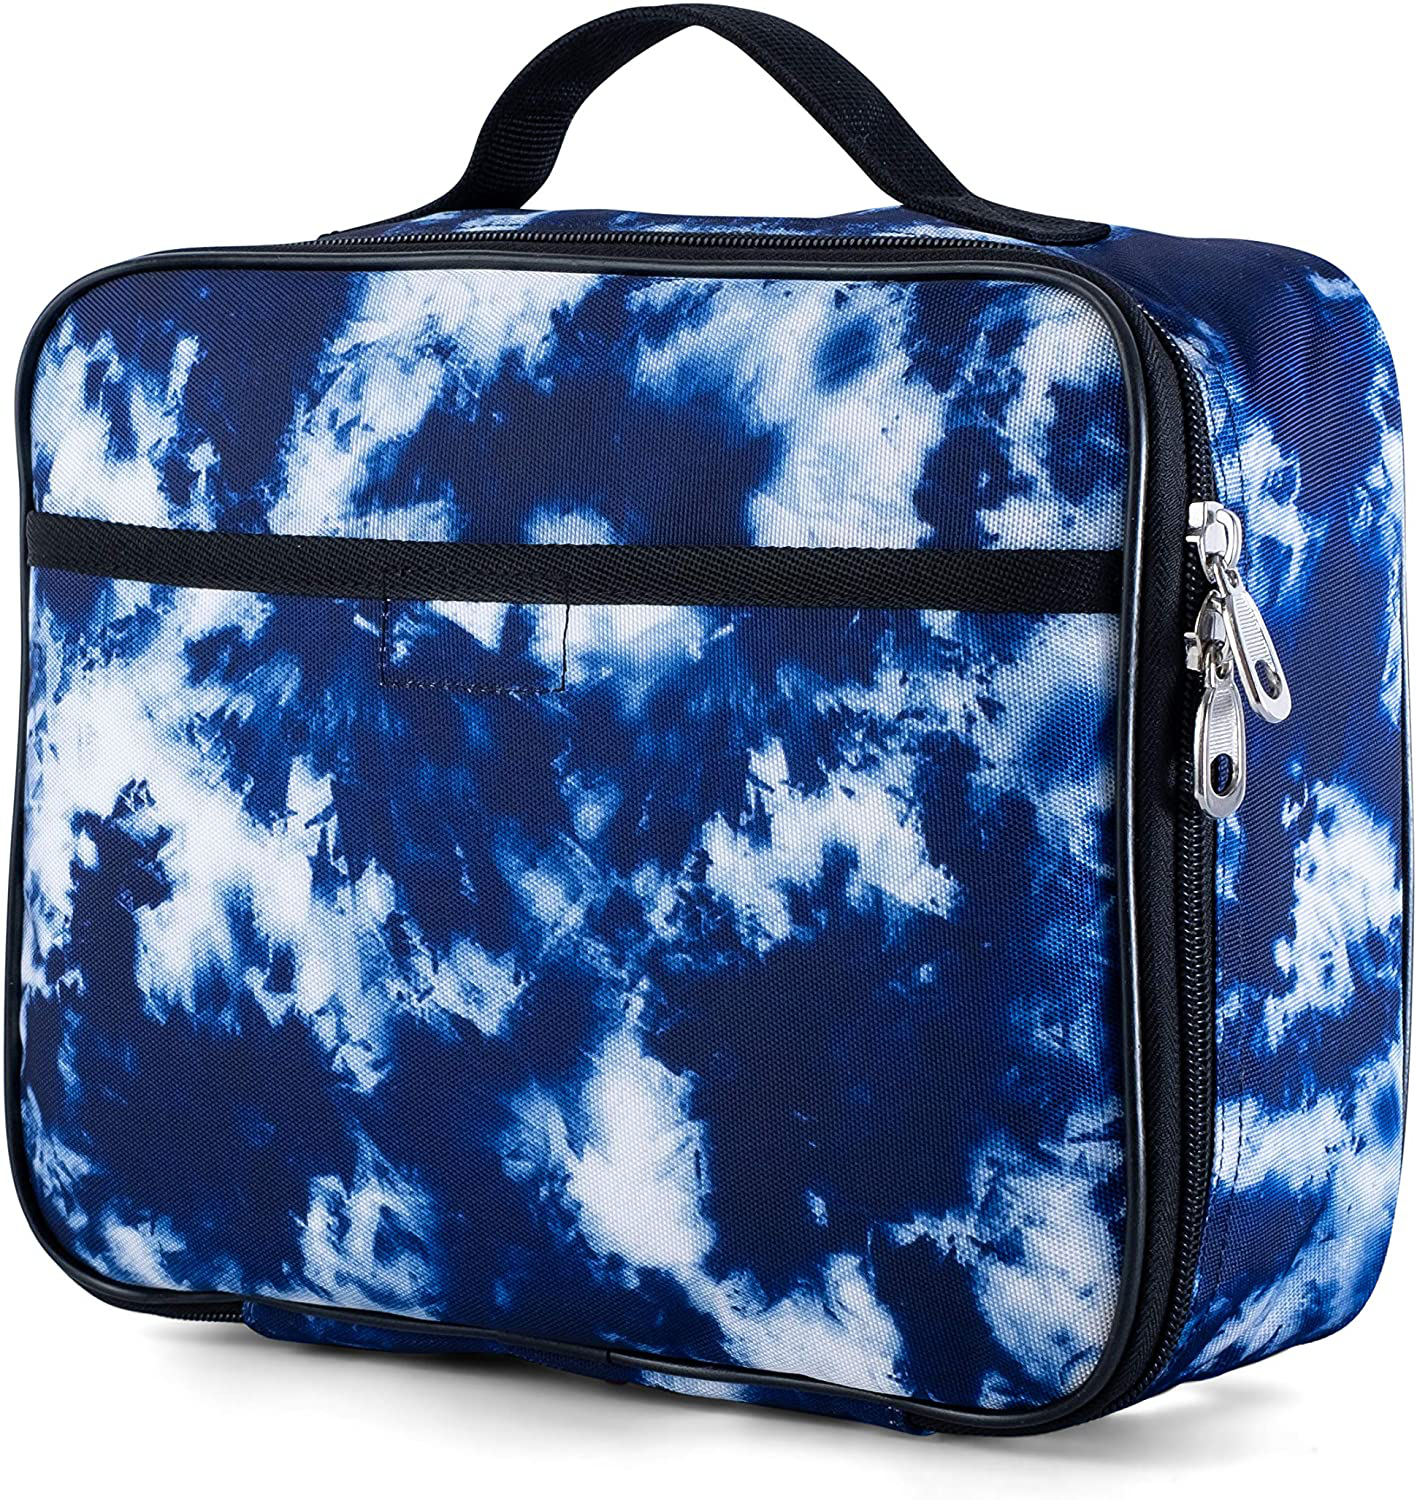 Fenrici Tie Dye Lunch Box for Girls, Girl's Lunch Box, Soft Sided Compartments, Spacious Girl's Lunch Bag for School, BPA Free, Food Safe,10.8in x